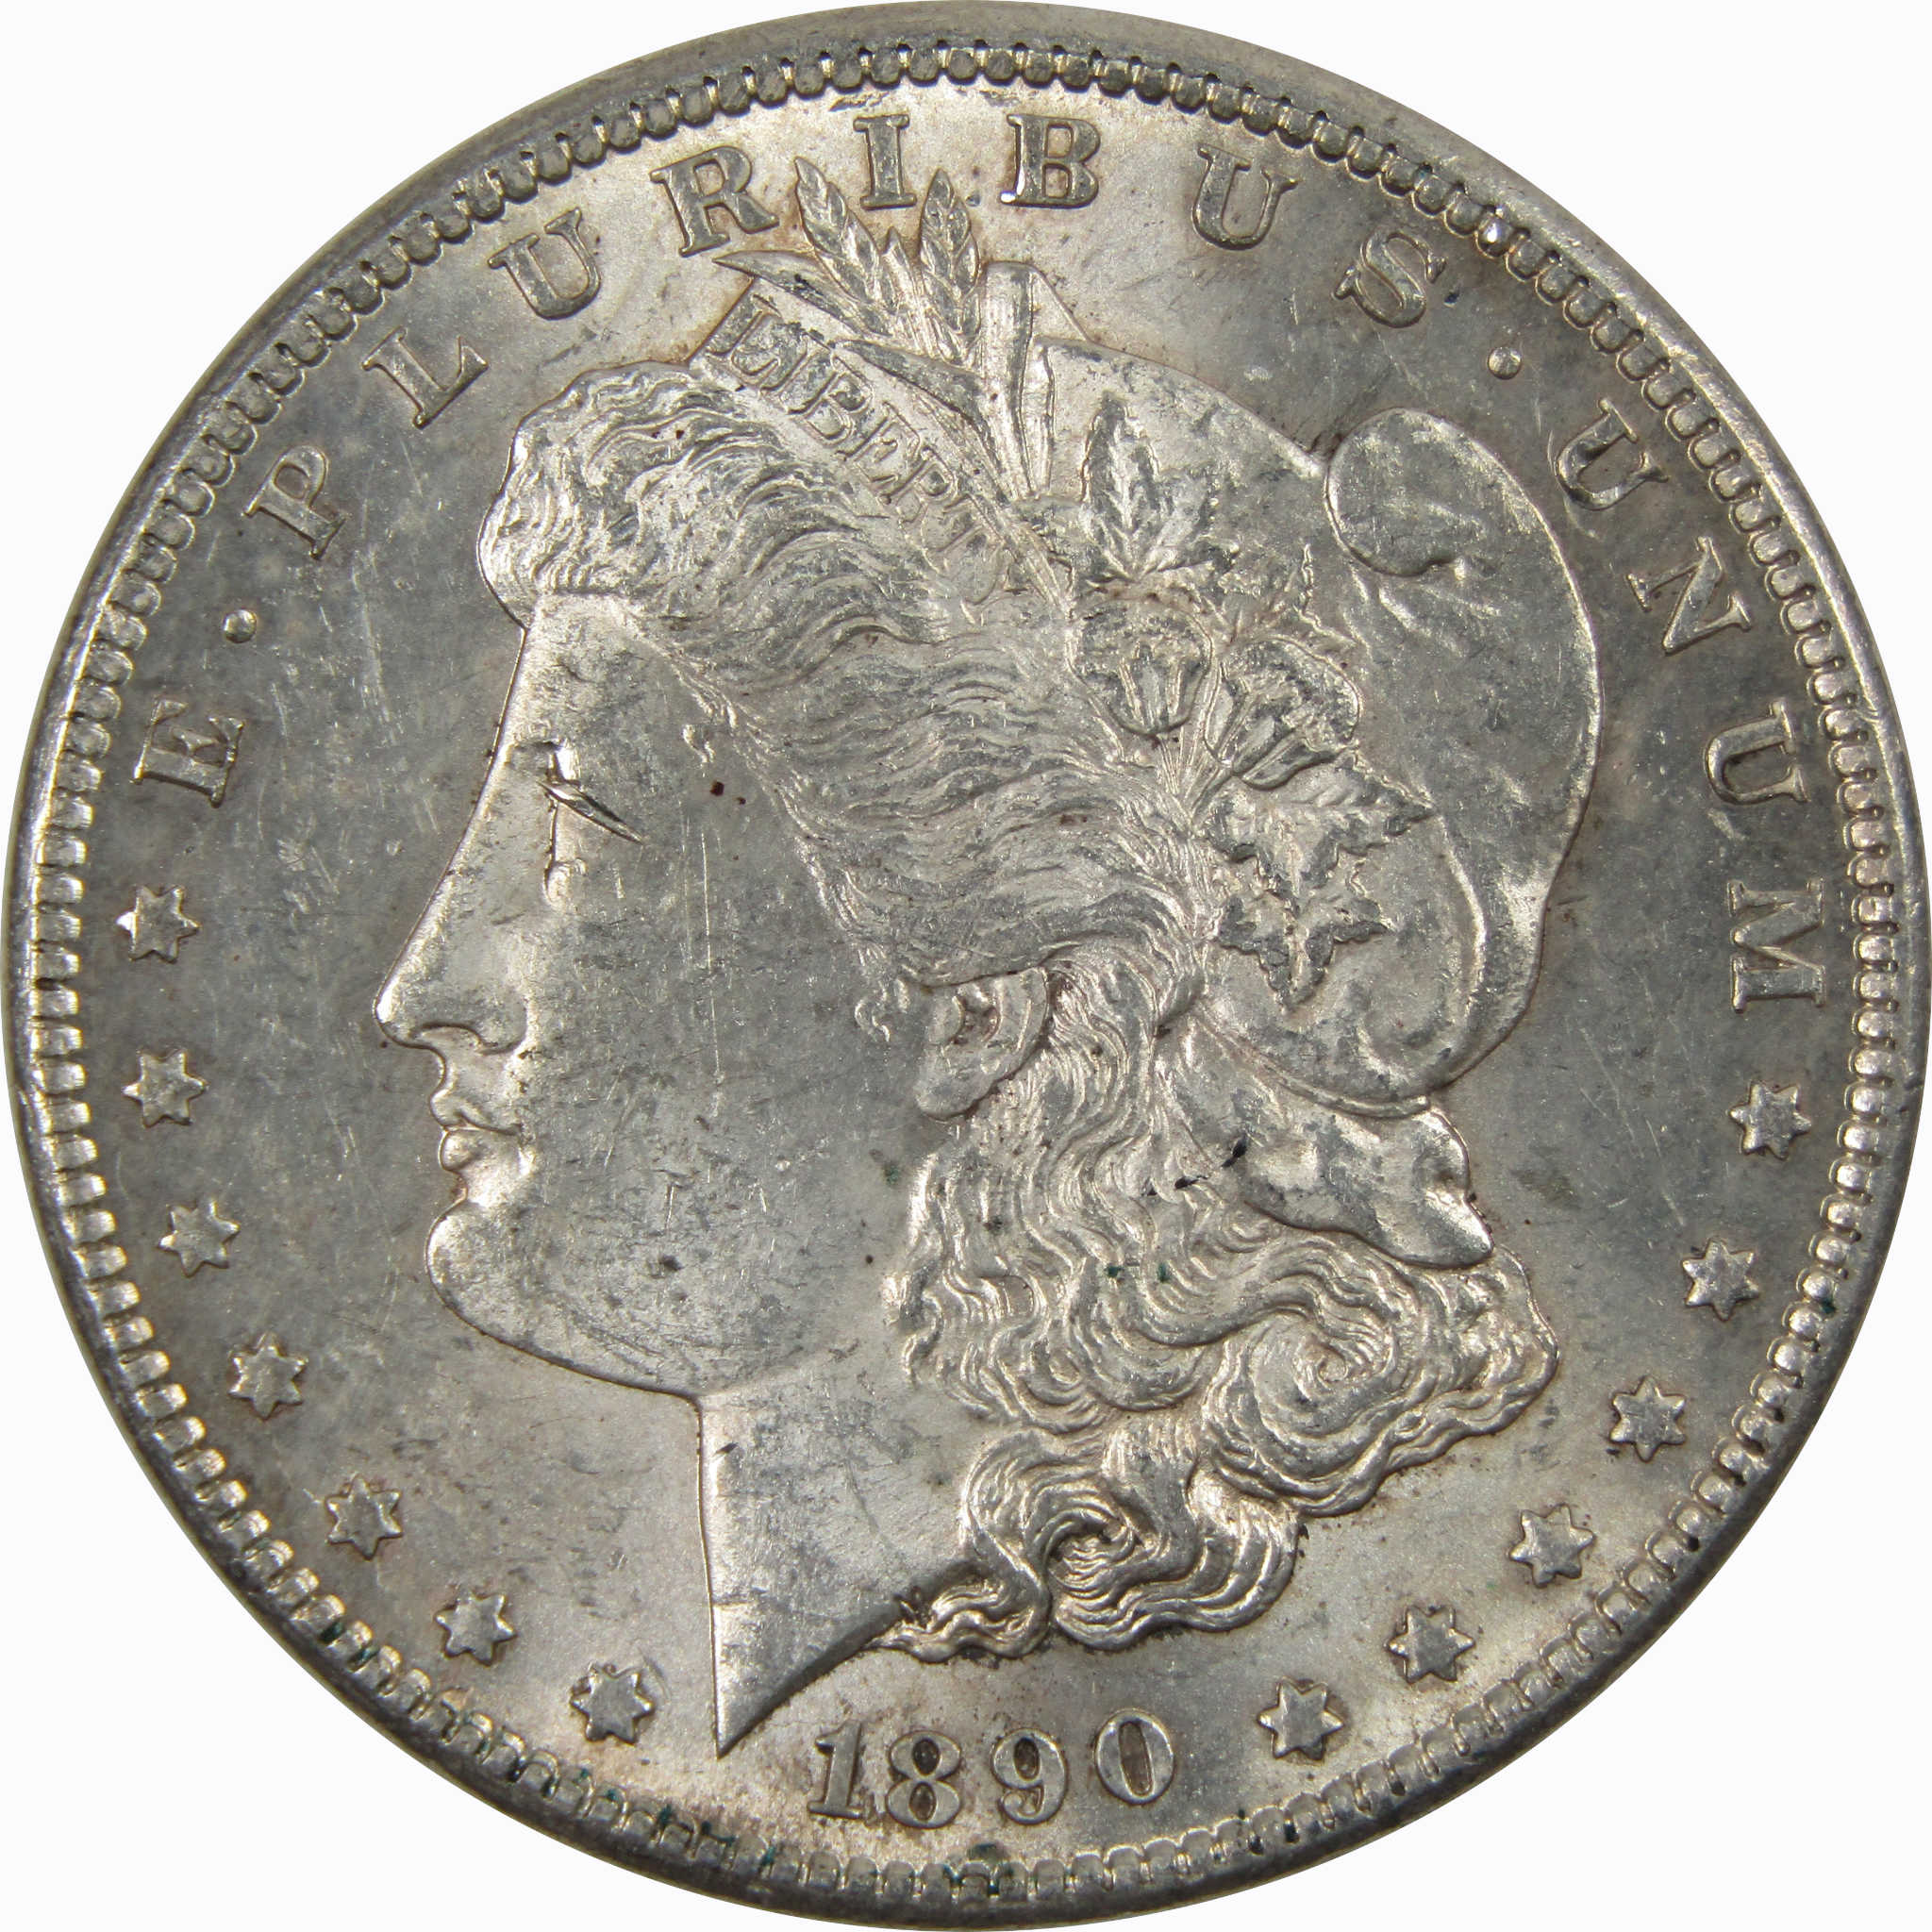 1890 CC Morgan Dollar BU Uncirculated Mint State Silver $1 SKU:I4360 - Morgan coin - Morgan silver dollar - Morgan silver dollar for sale - Profile Coins &amp; Collectibles